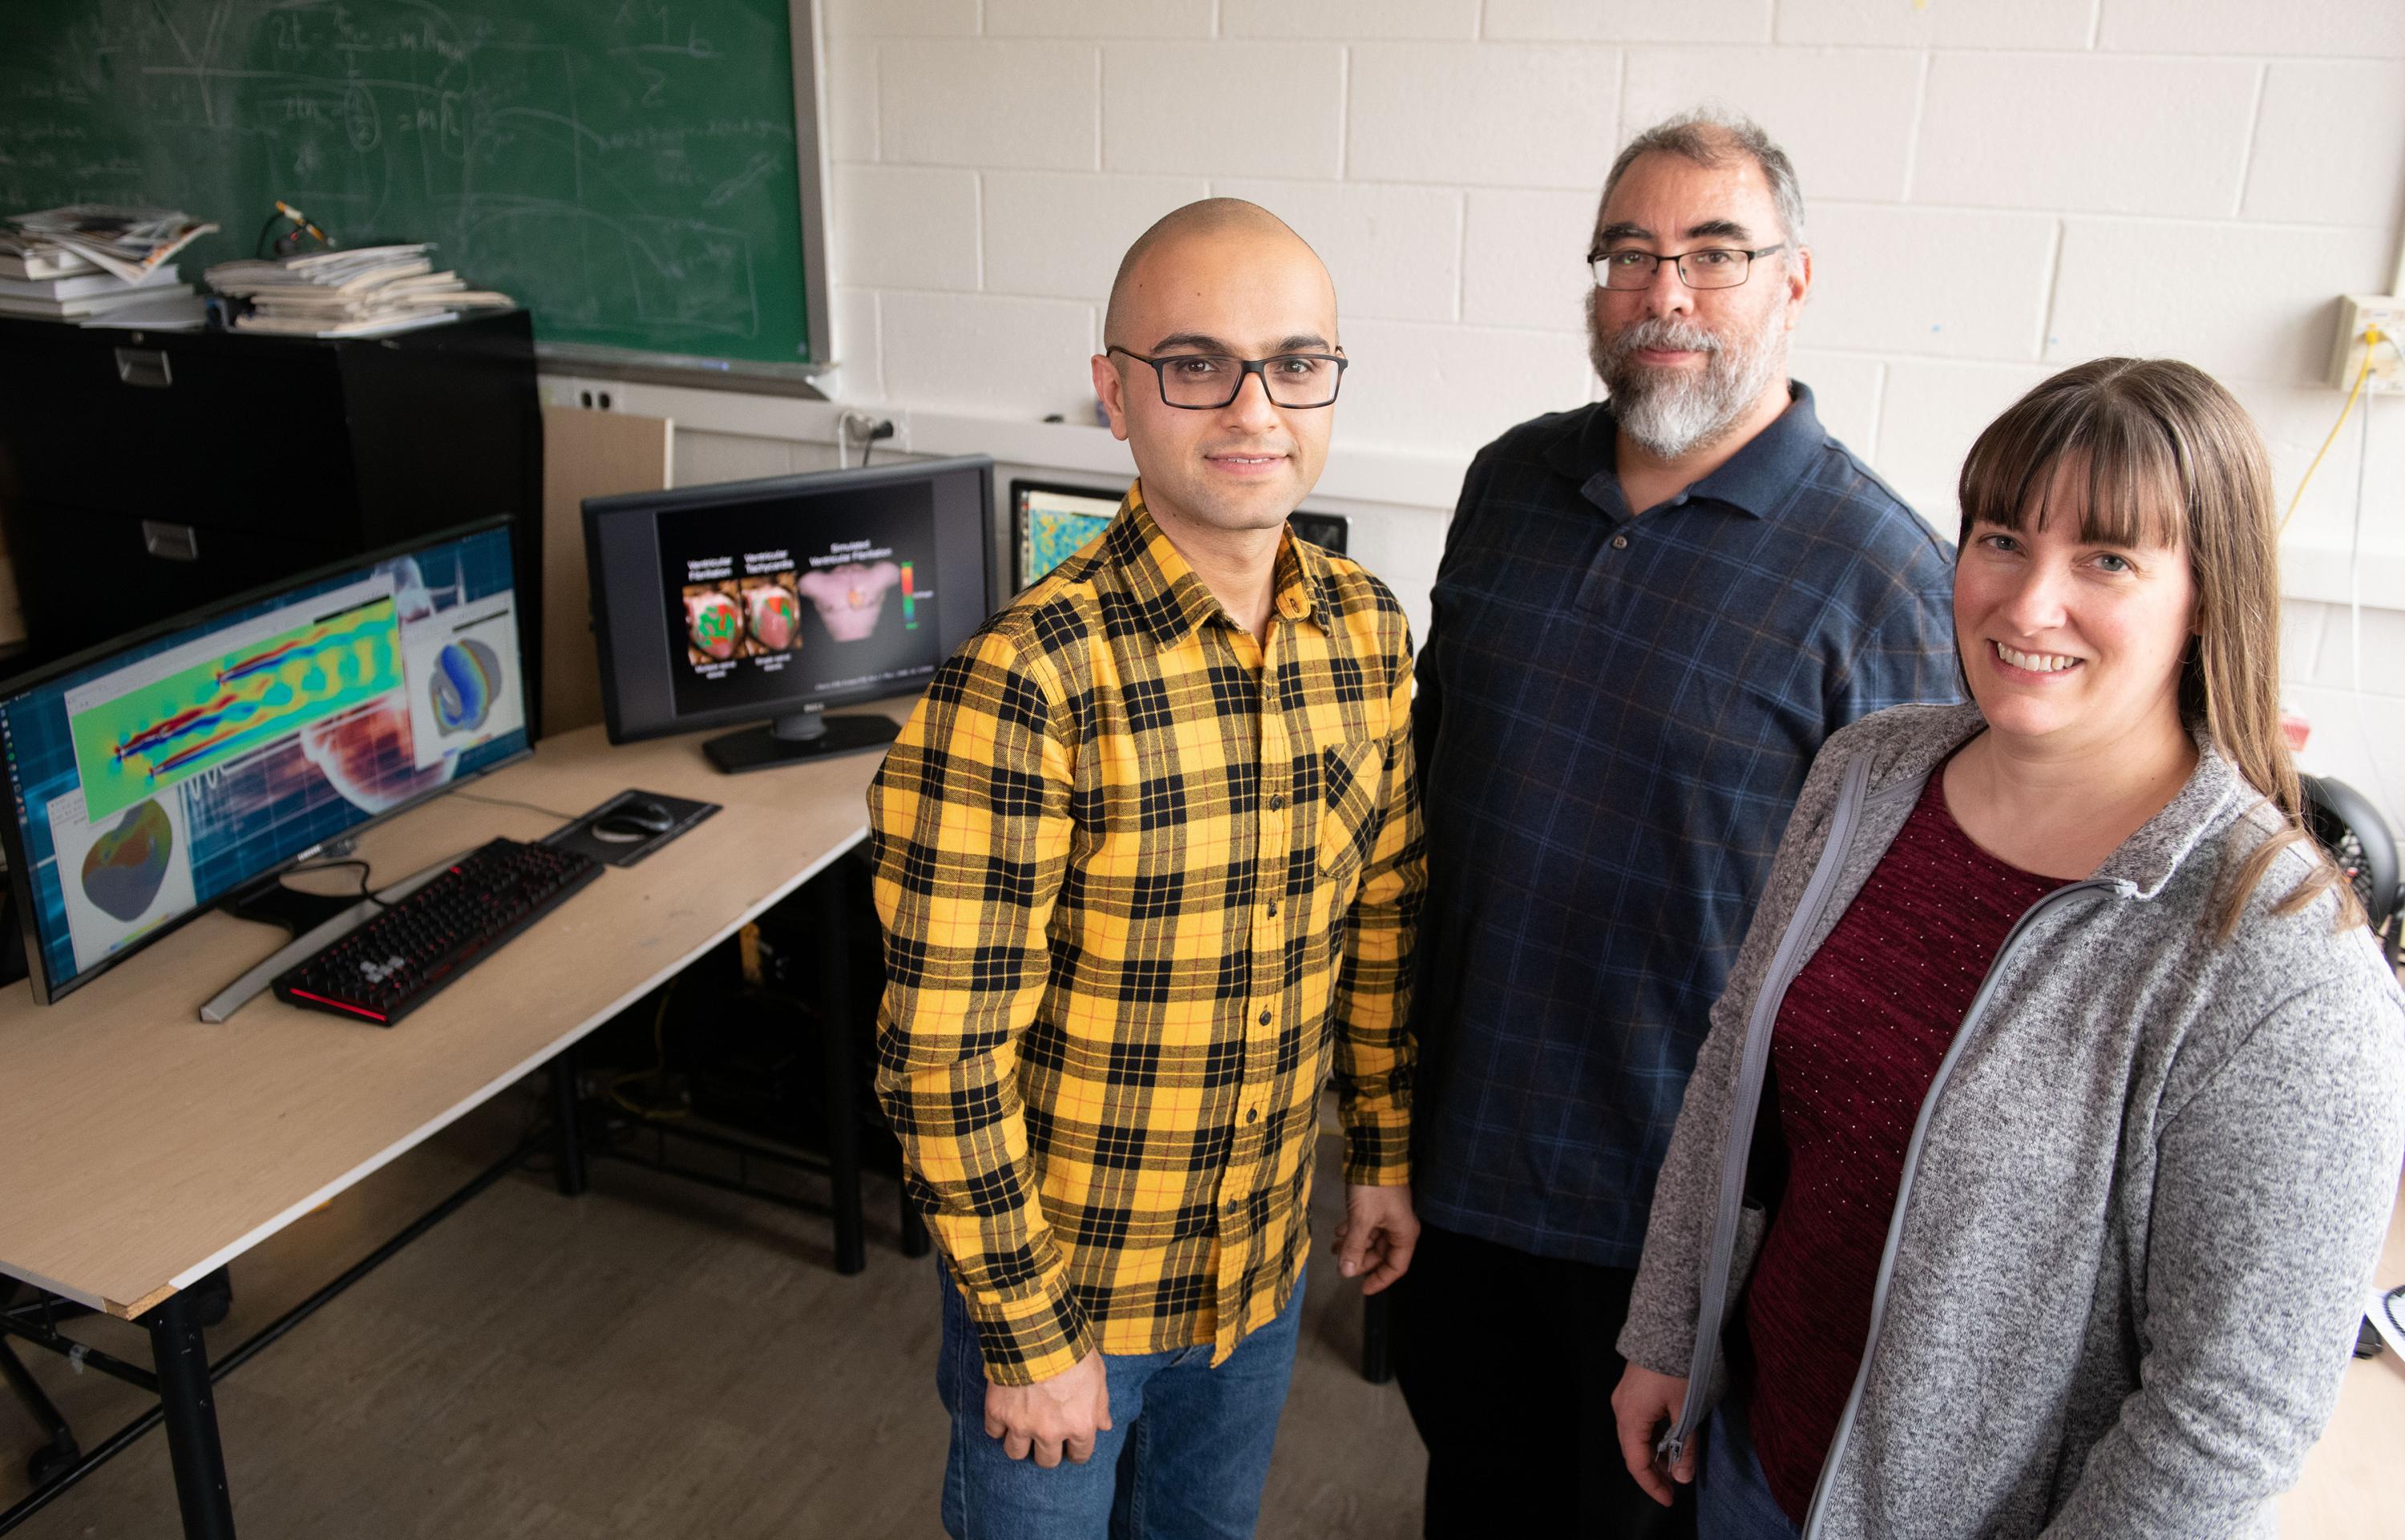 Researchers have developed a system that uses graphics processing chips designed for gaming applications and software that runs on ordinary web browsers to produce simulations that formerly required high-powered computers. Shown are Abouzar Kaboudian, Flavio Fenton and Elizabeth Cherry. (Photo: Allison Carter, Georgia Tech)